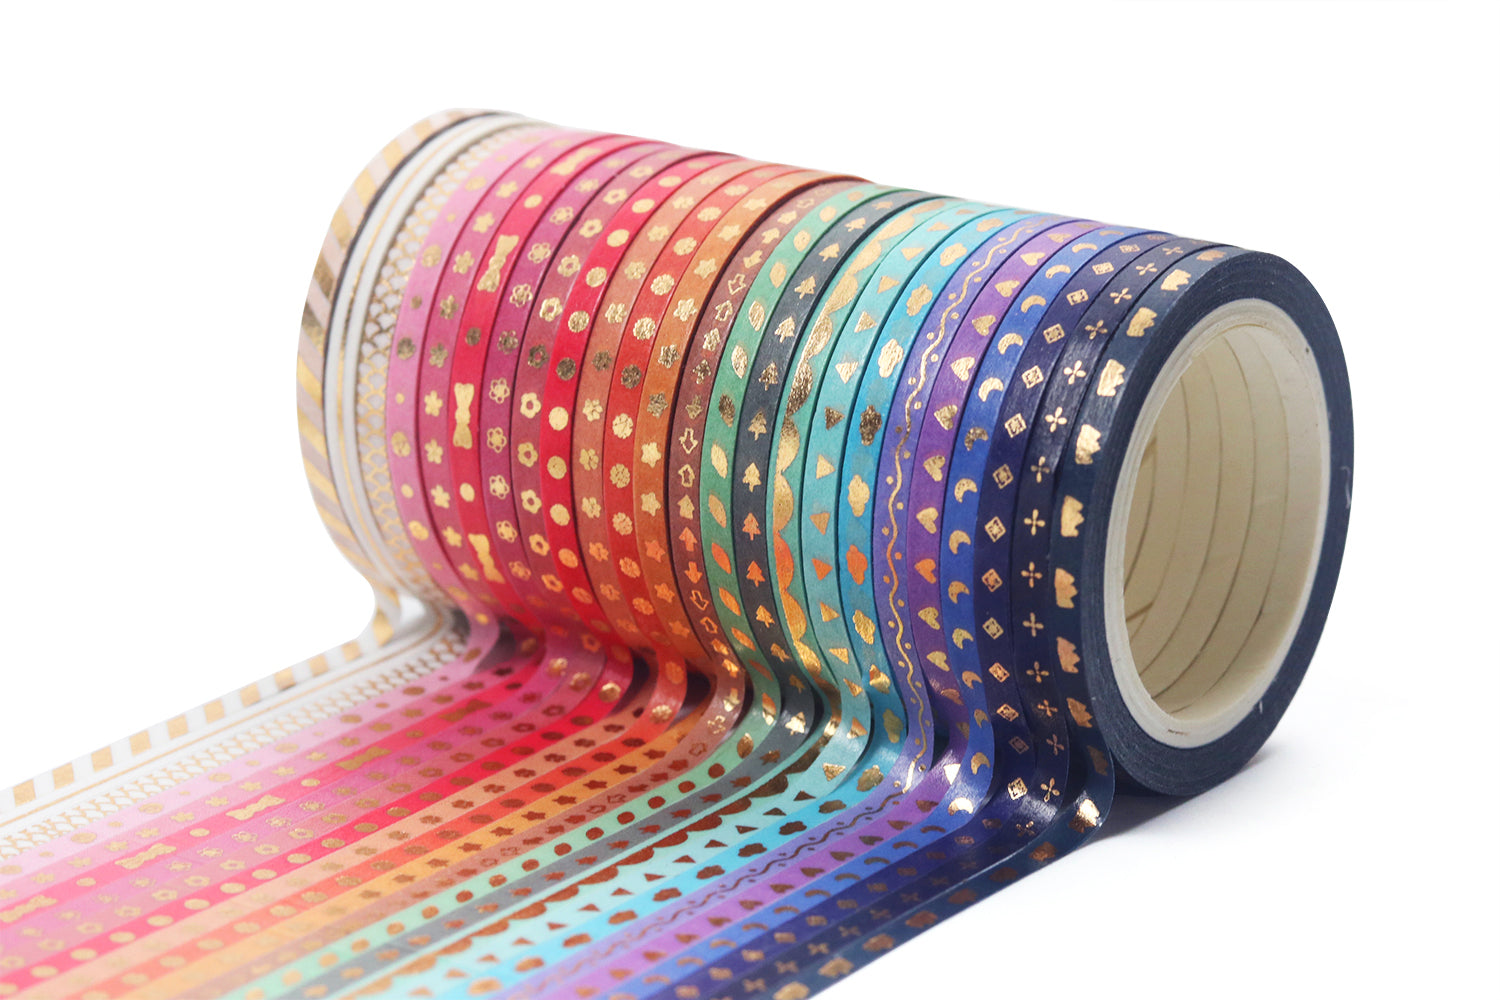 YUBBAEX 24 Rolls Skinny Washi Tape Set Gold Foil Print Decorative Tapes for  Arts, DIY Crafts, Bullet Journals, Planners, Scrapbooking, Wrapping (Basic